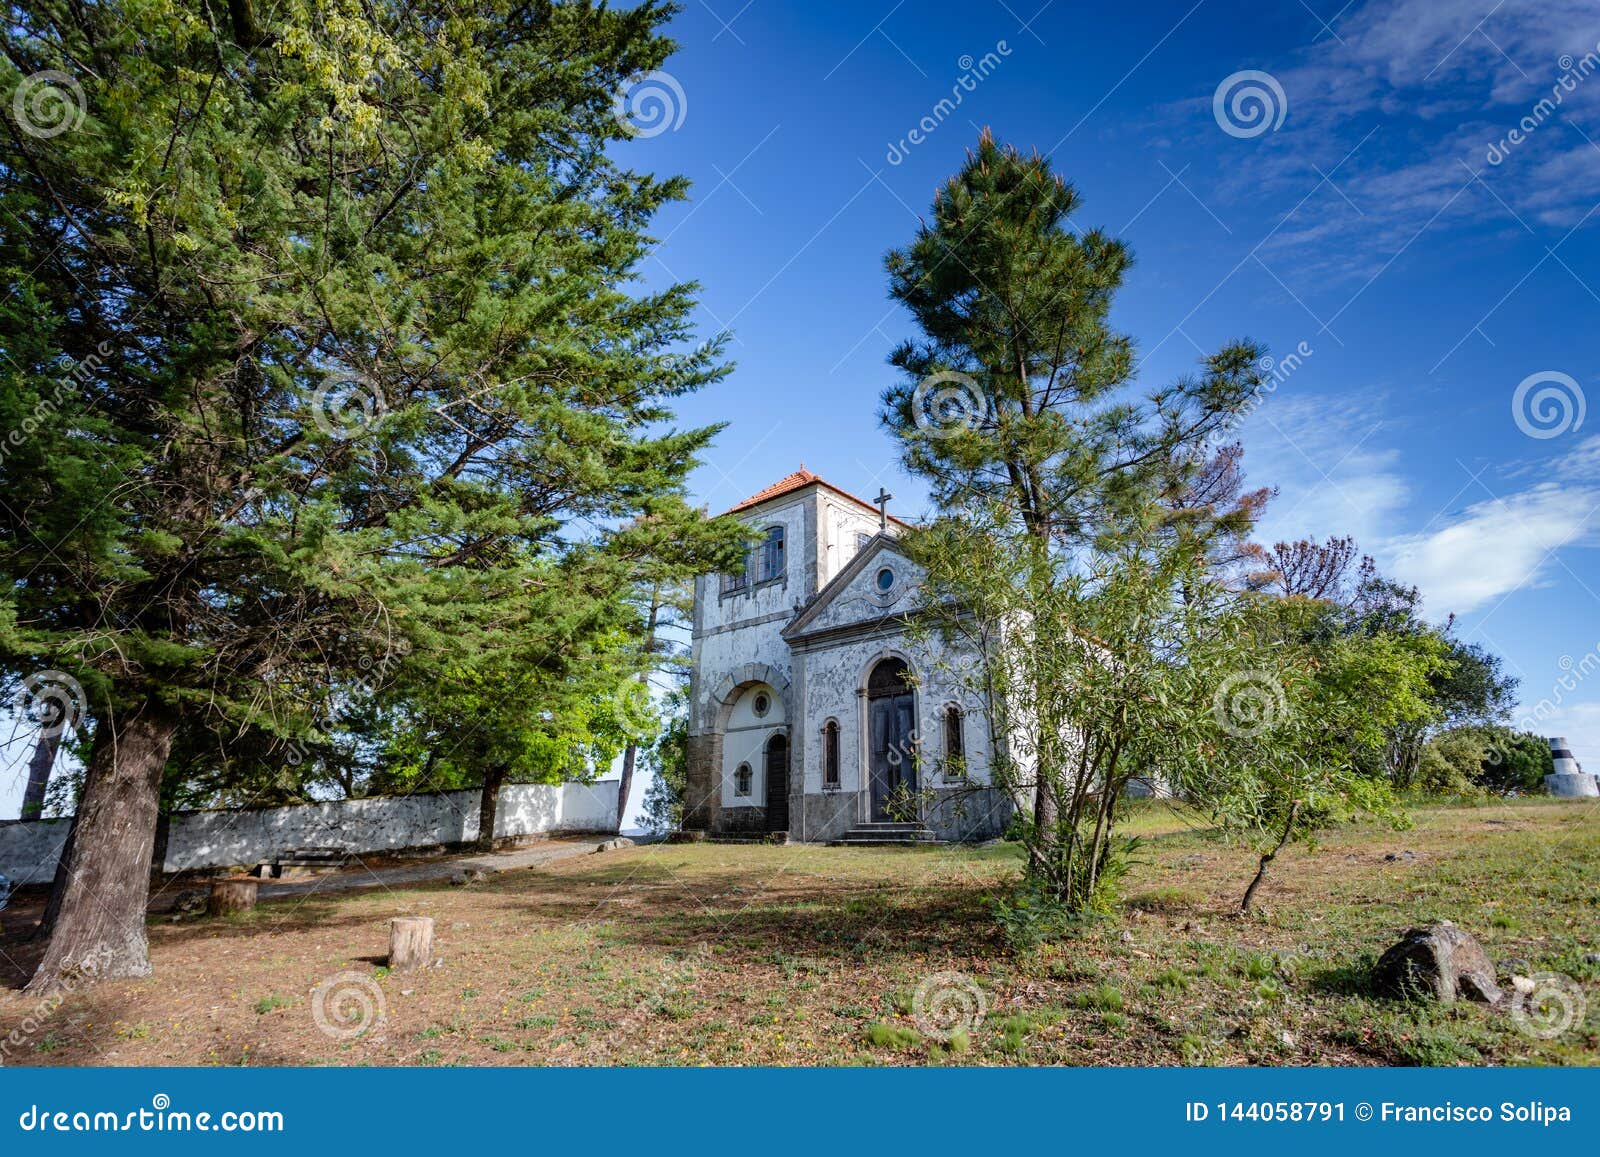 church among  trees at summer time, in figueiro dos vinhos, portugal